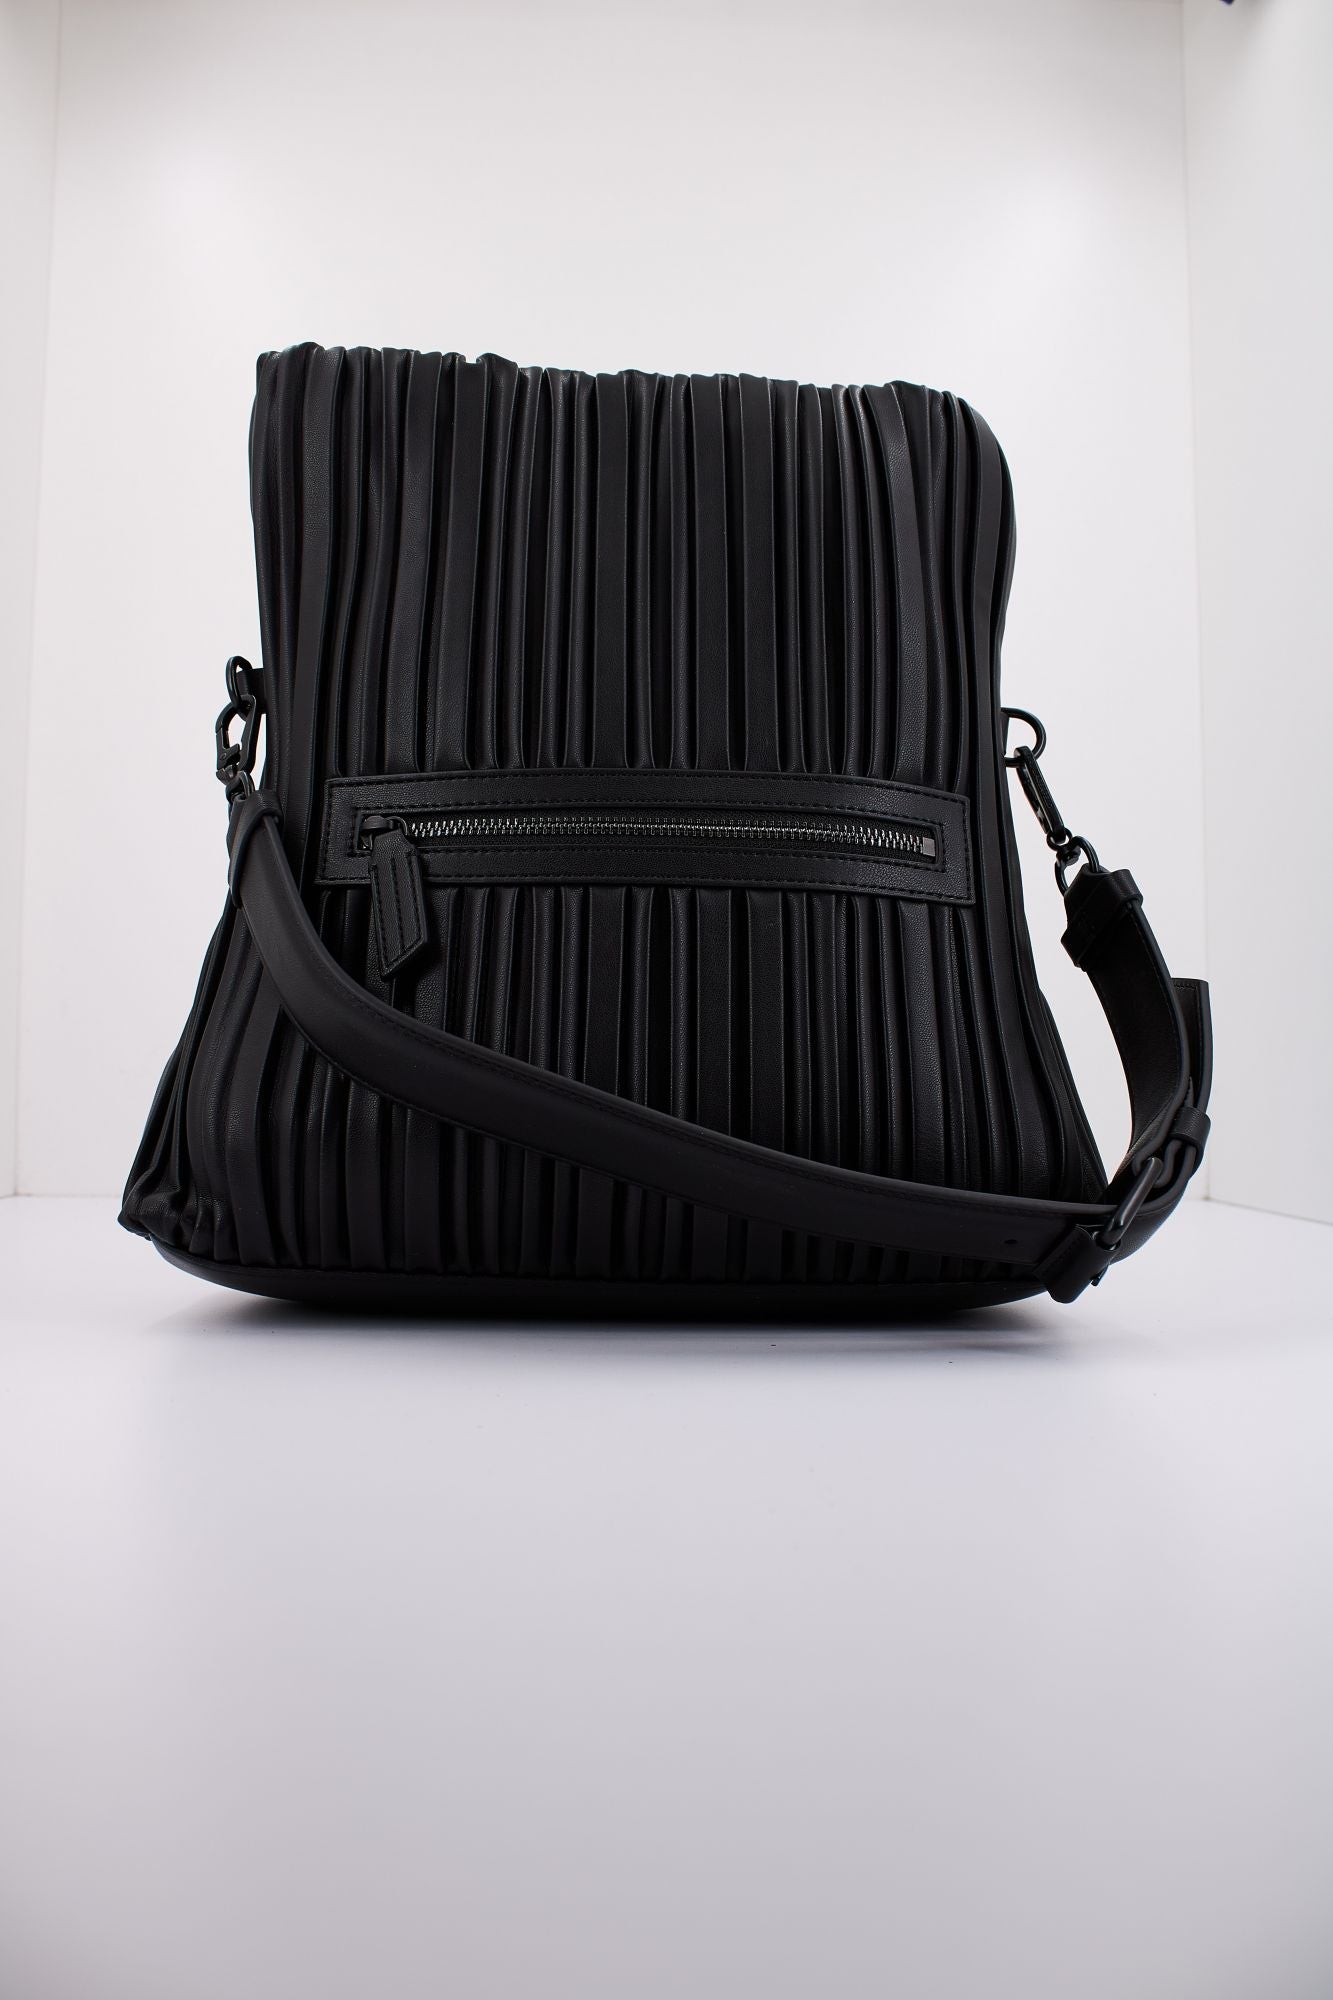 KARL LAGERFELD KUSIONS SM FOLDED TOTE en color NEGRO (3)